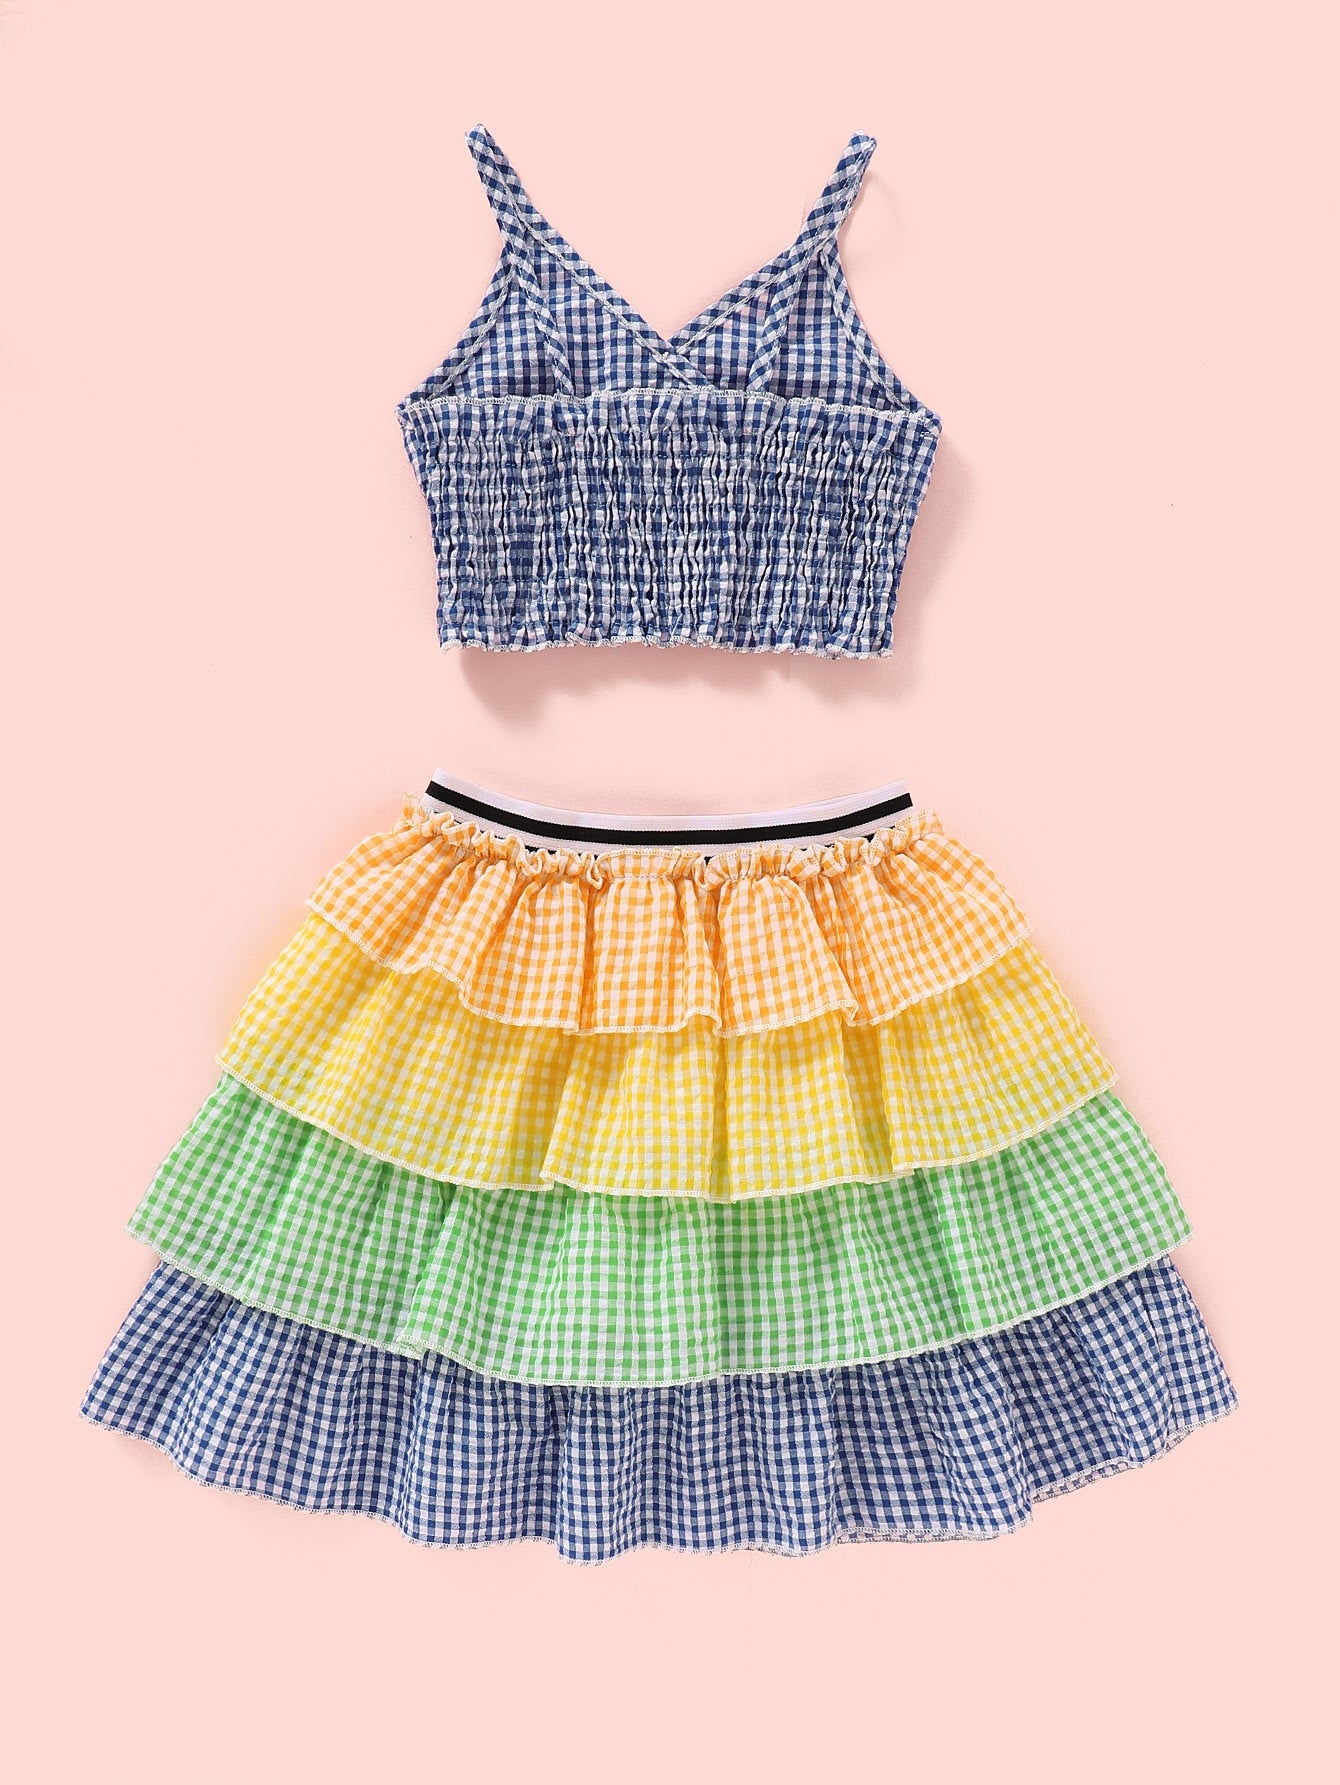 Girls set features a plaid cropped top and multi-layered skirt